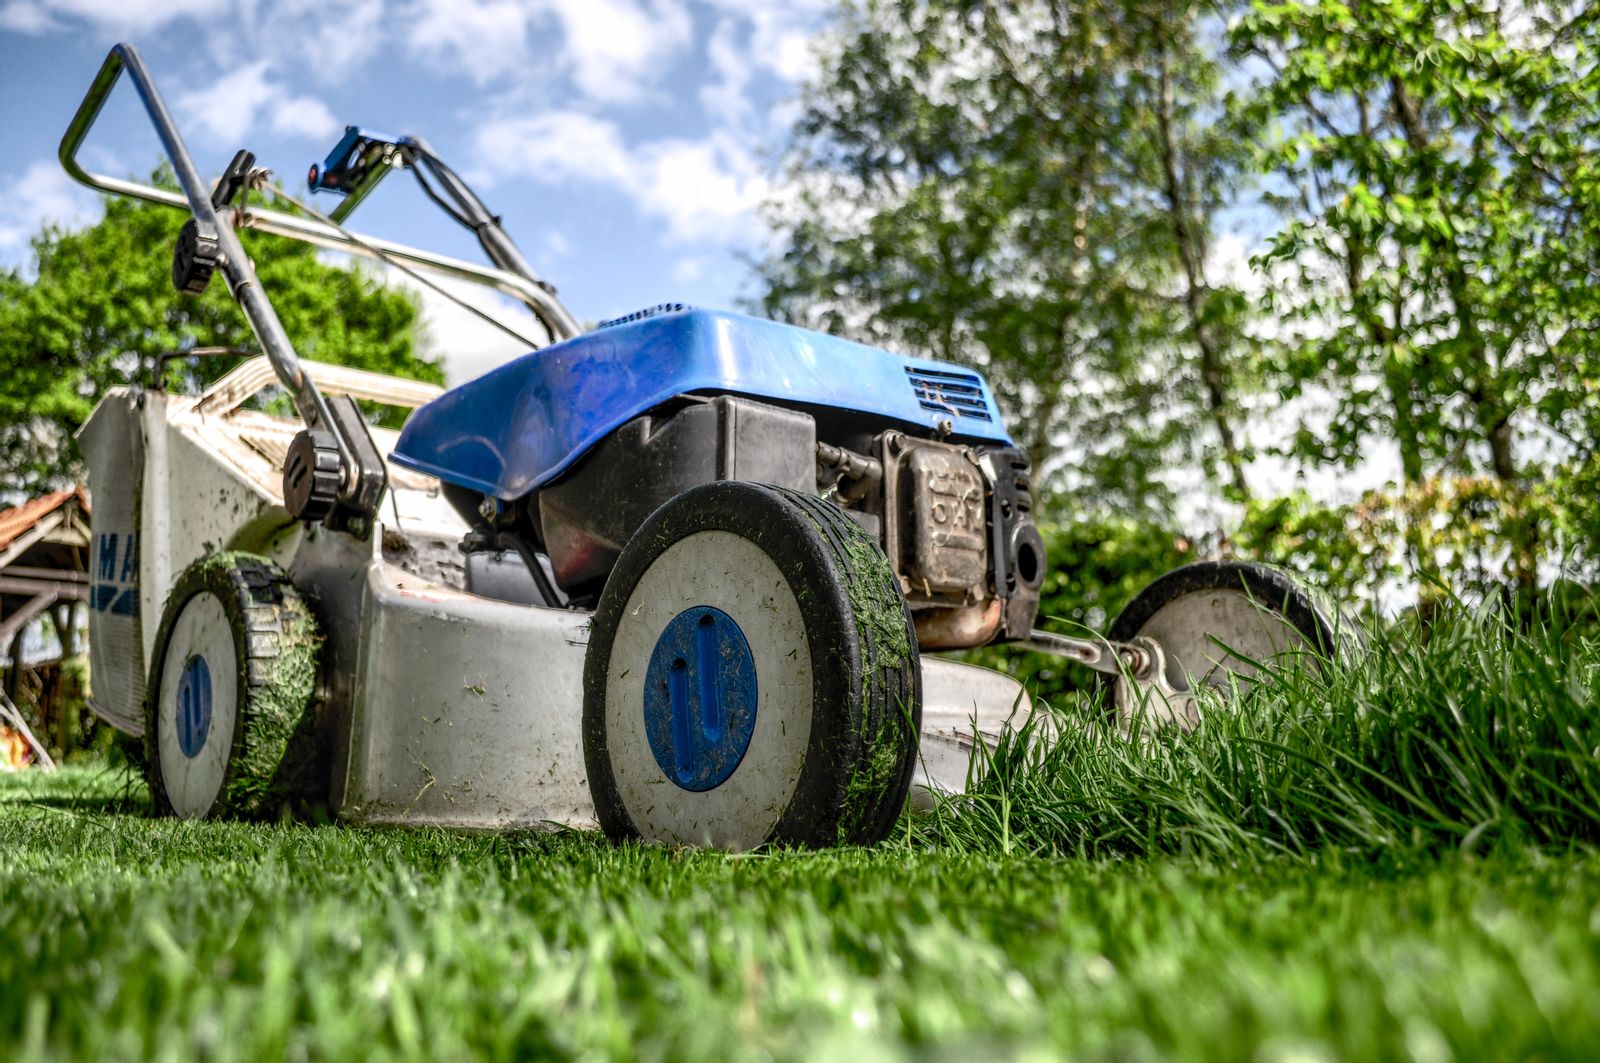 Modern Lawns | What should you do to your lawn?